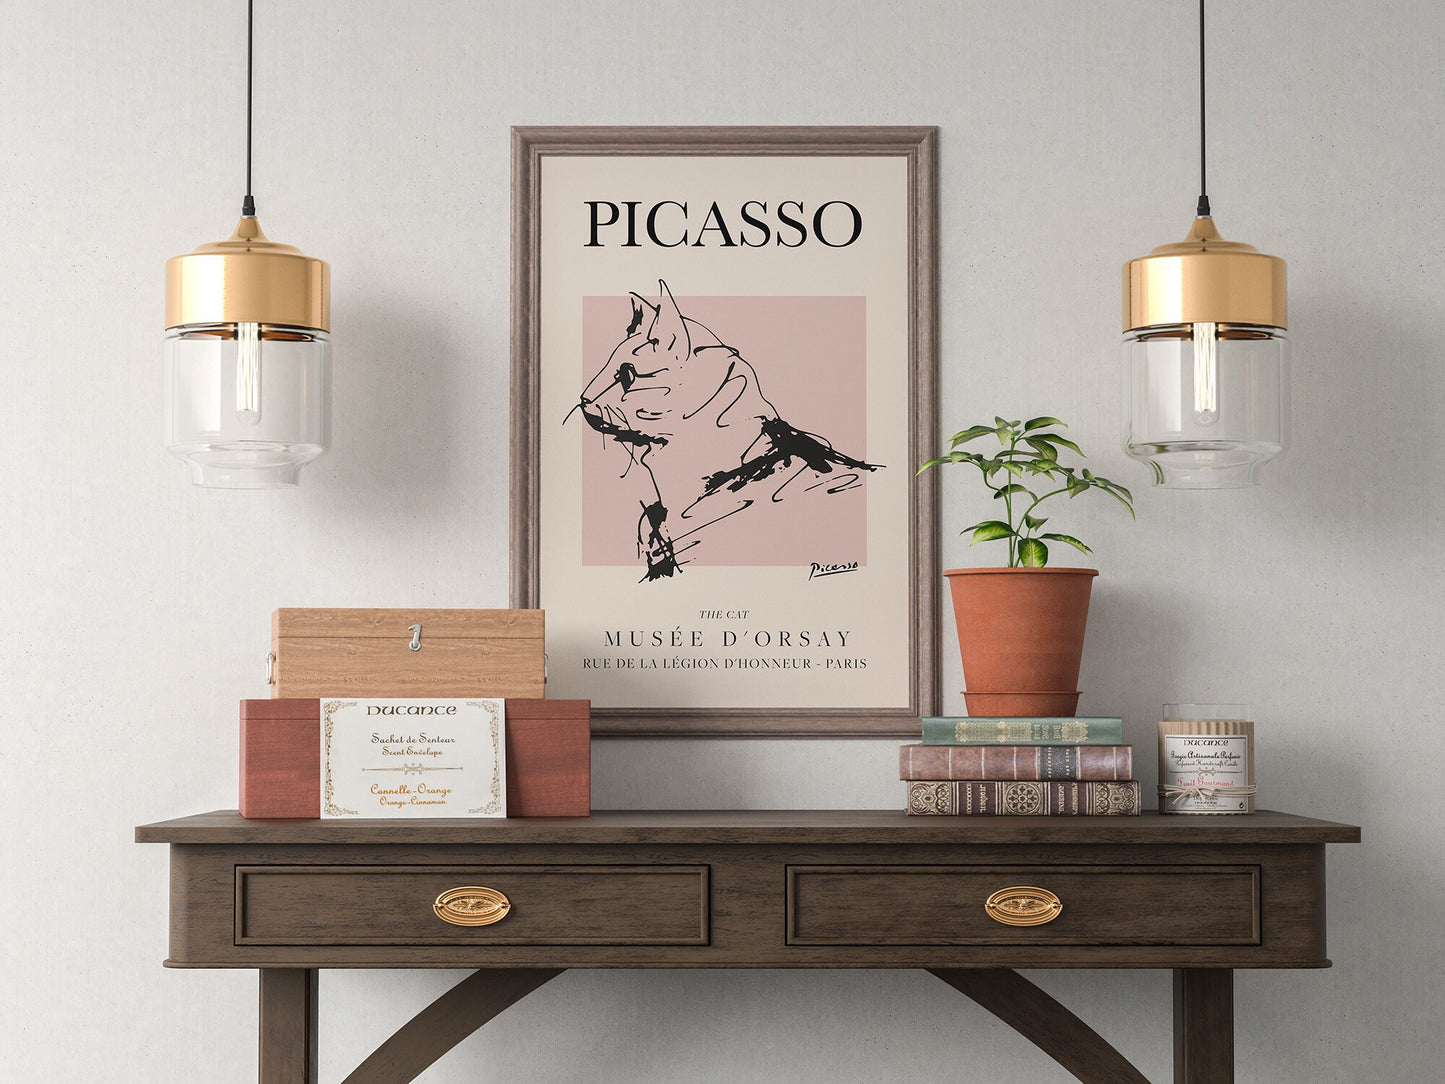 Picasso - Cat, Exhibition Vintage Line Art Poster, Minimalist Line Drawing, Ideal Home Decor or Gift Print